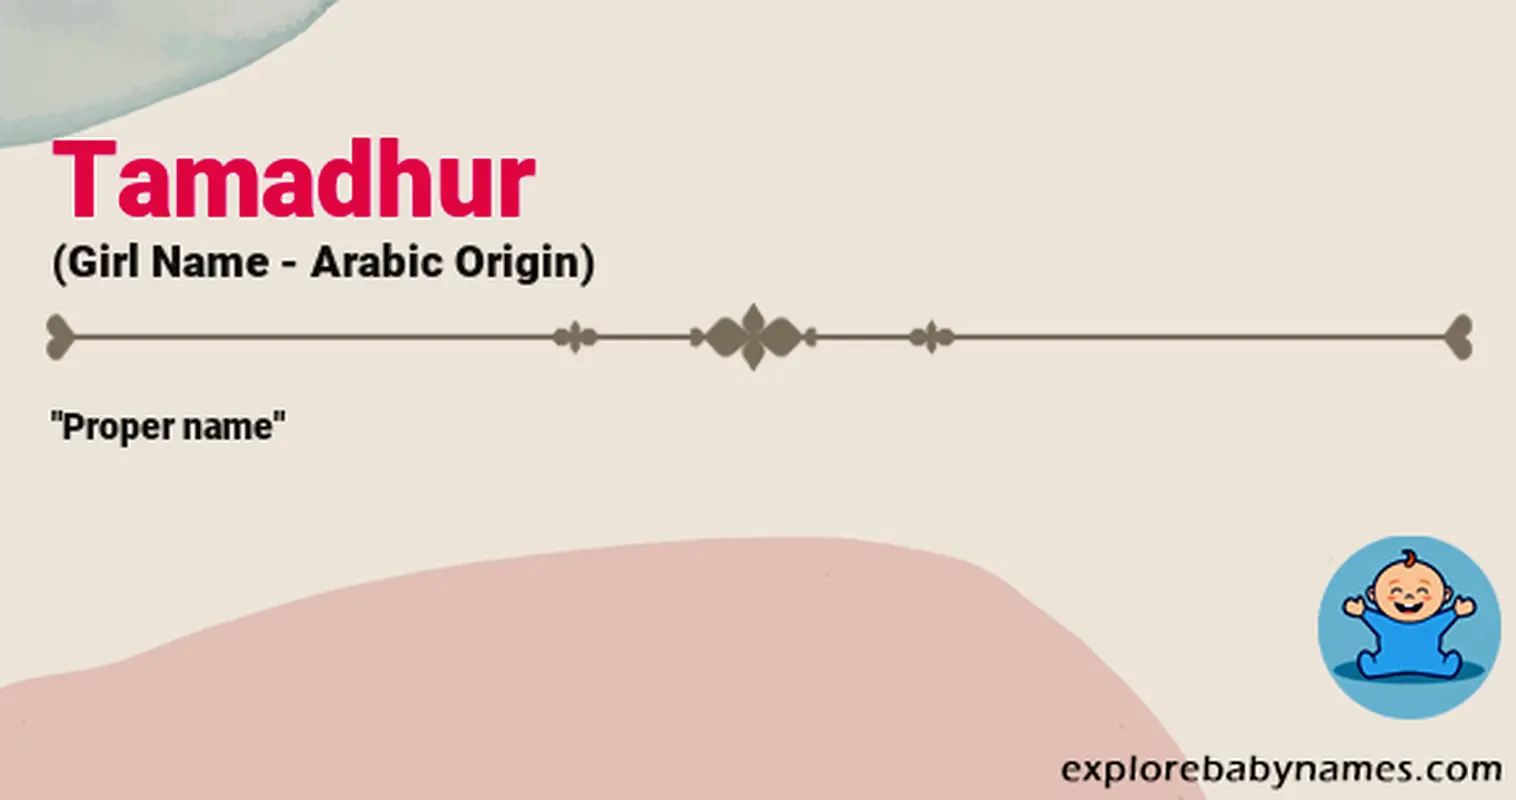 Meaning of Tamadhur